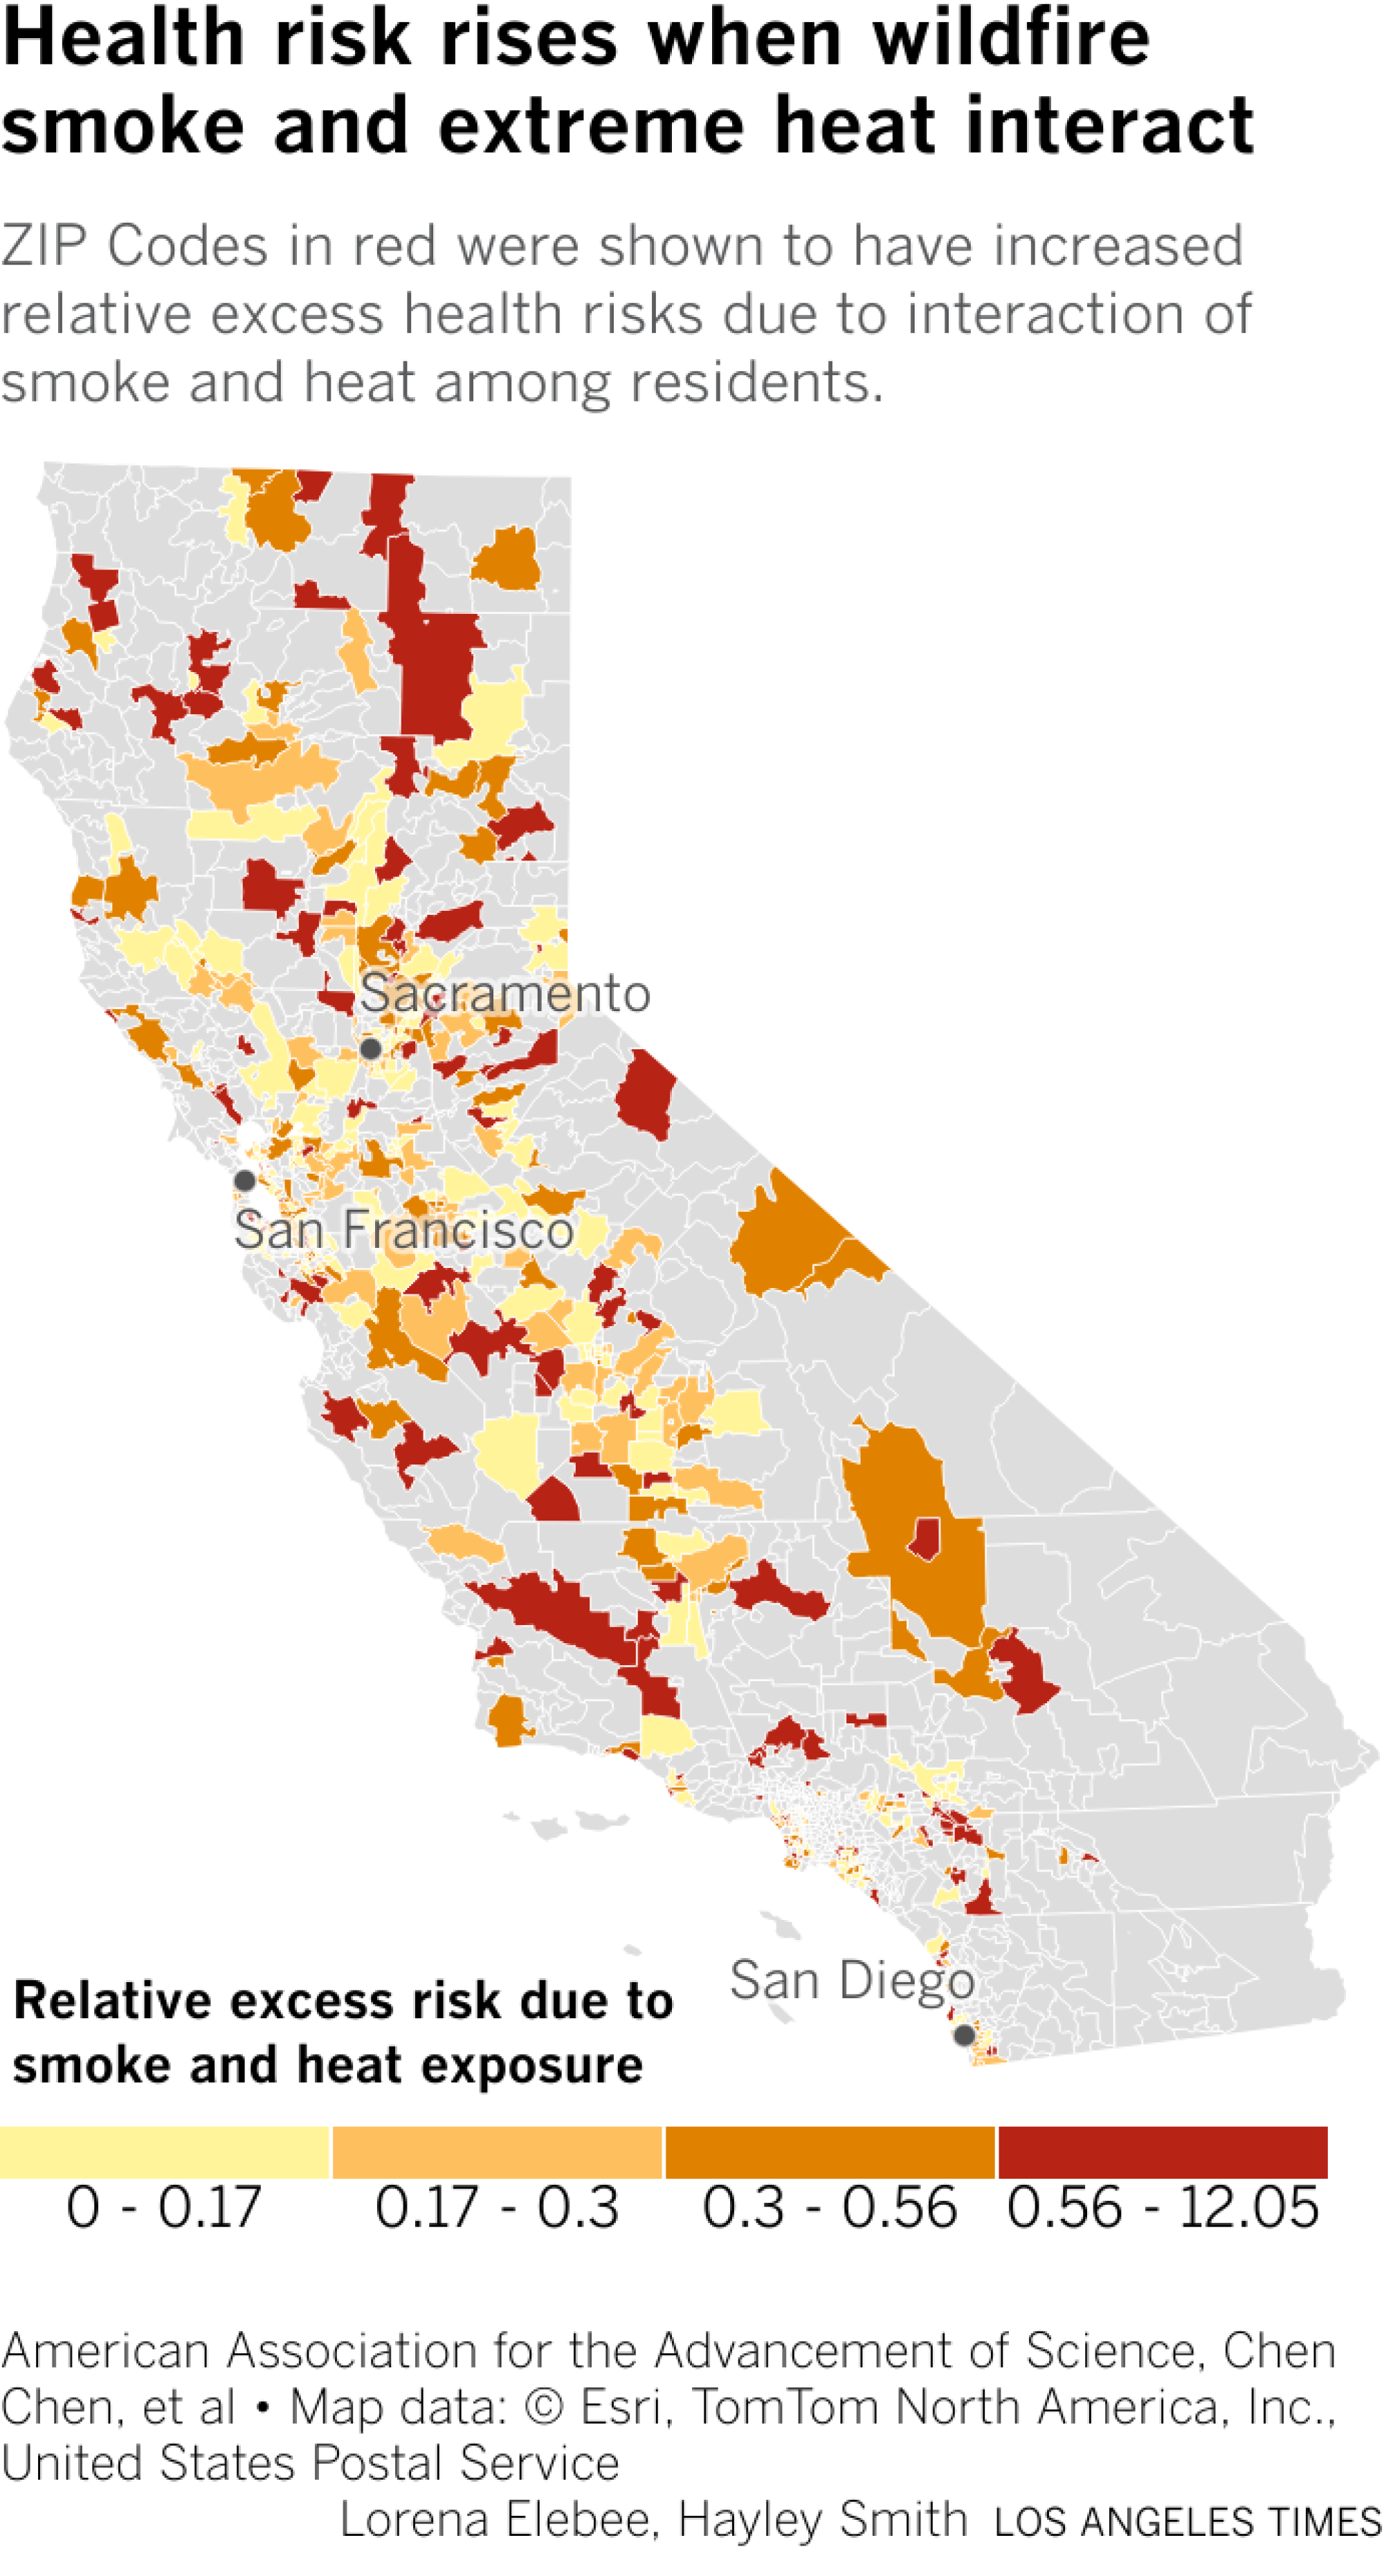 Map of California showing low to high health risk areas by zip code due to exposure to heat and wildfire smoke.